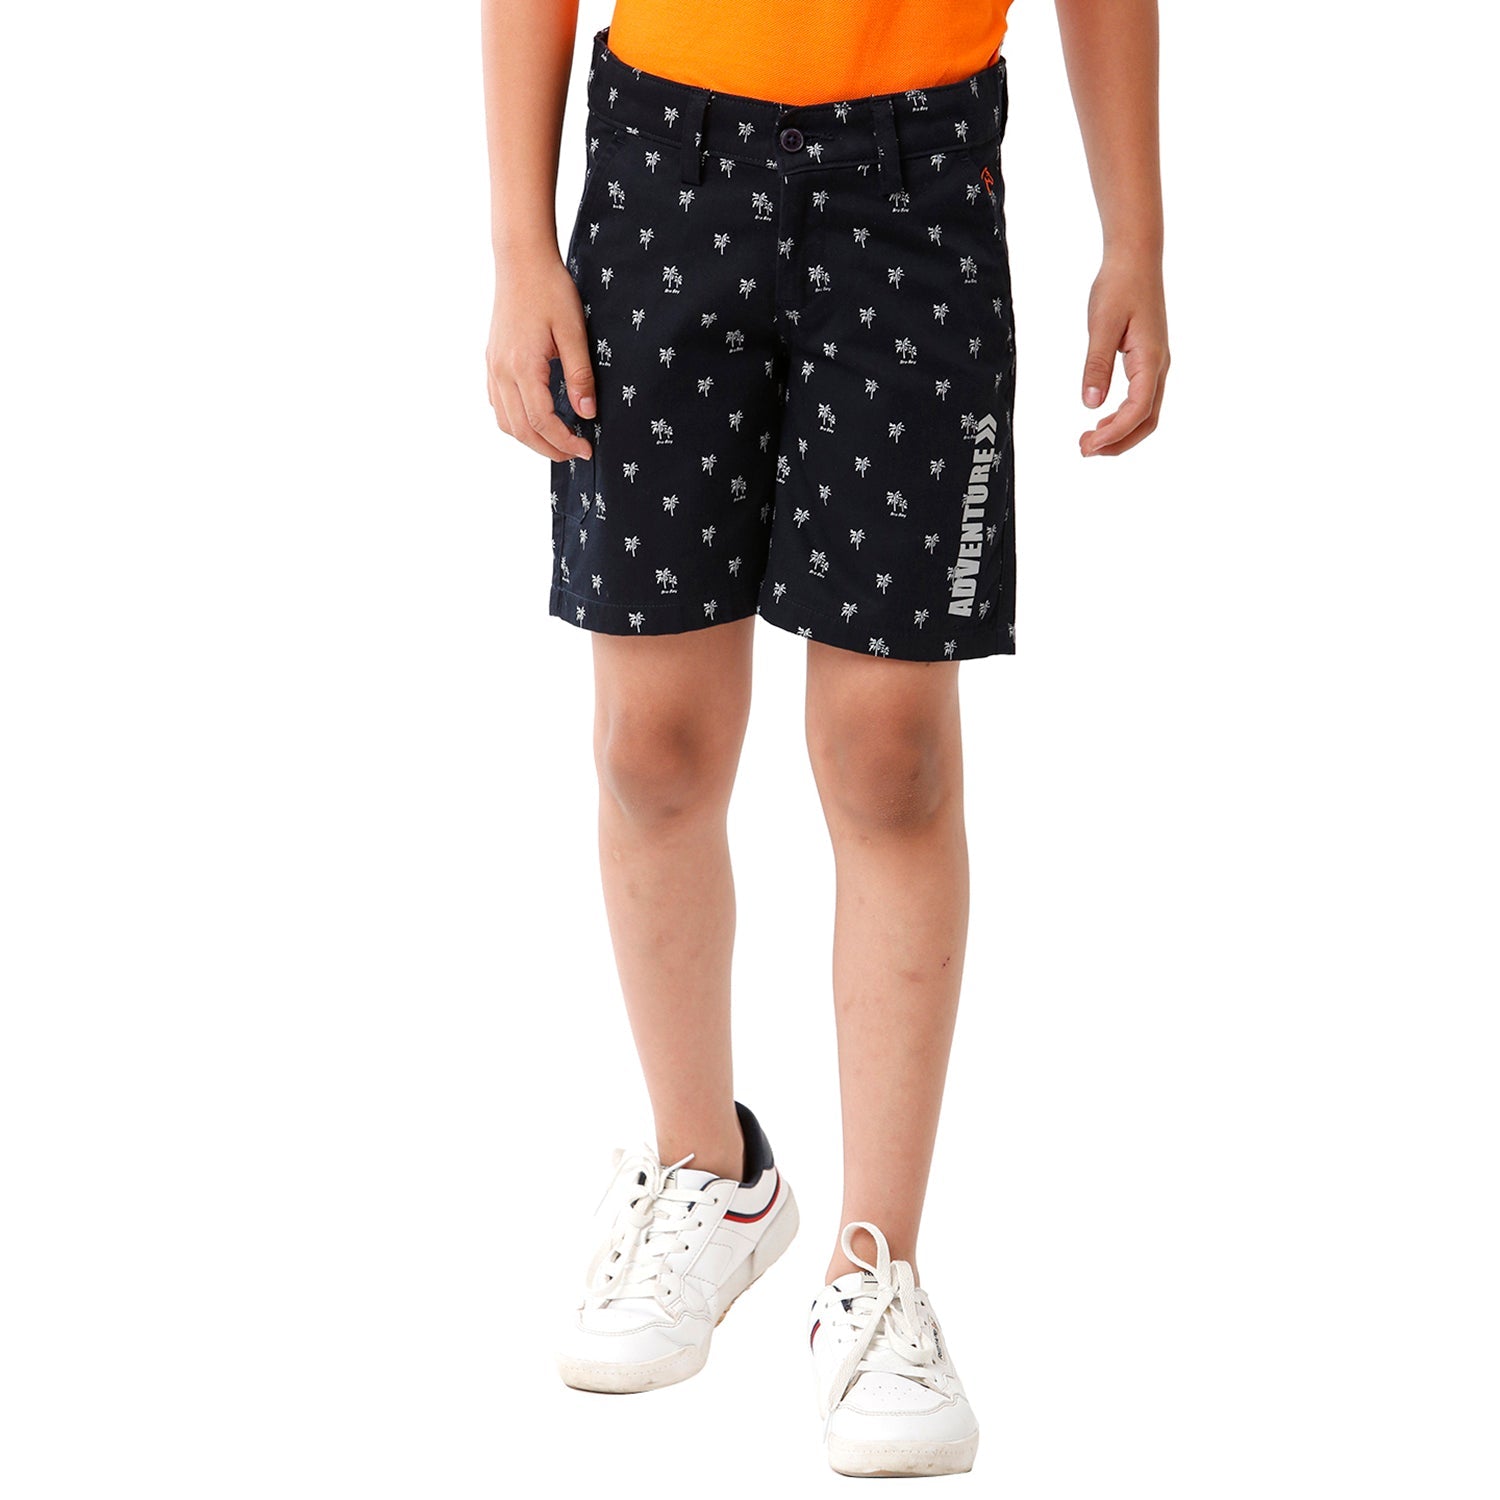 Classic Polo Bro Boys Printed Slim Fit Navy Color Cotton Shorts - BBSHRT S2 1D Shorts Classic Polo 